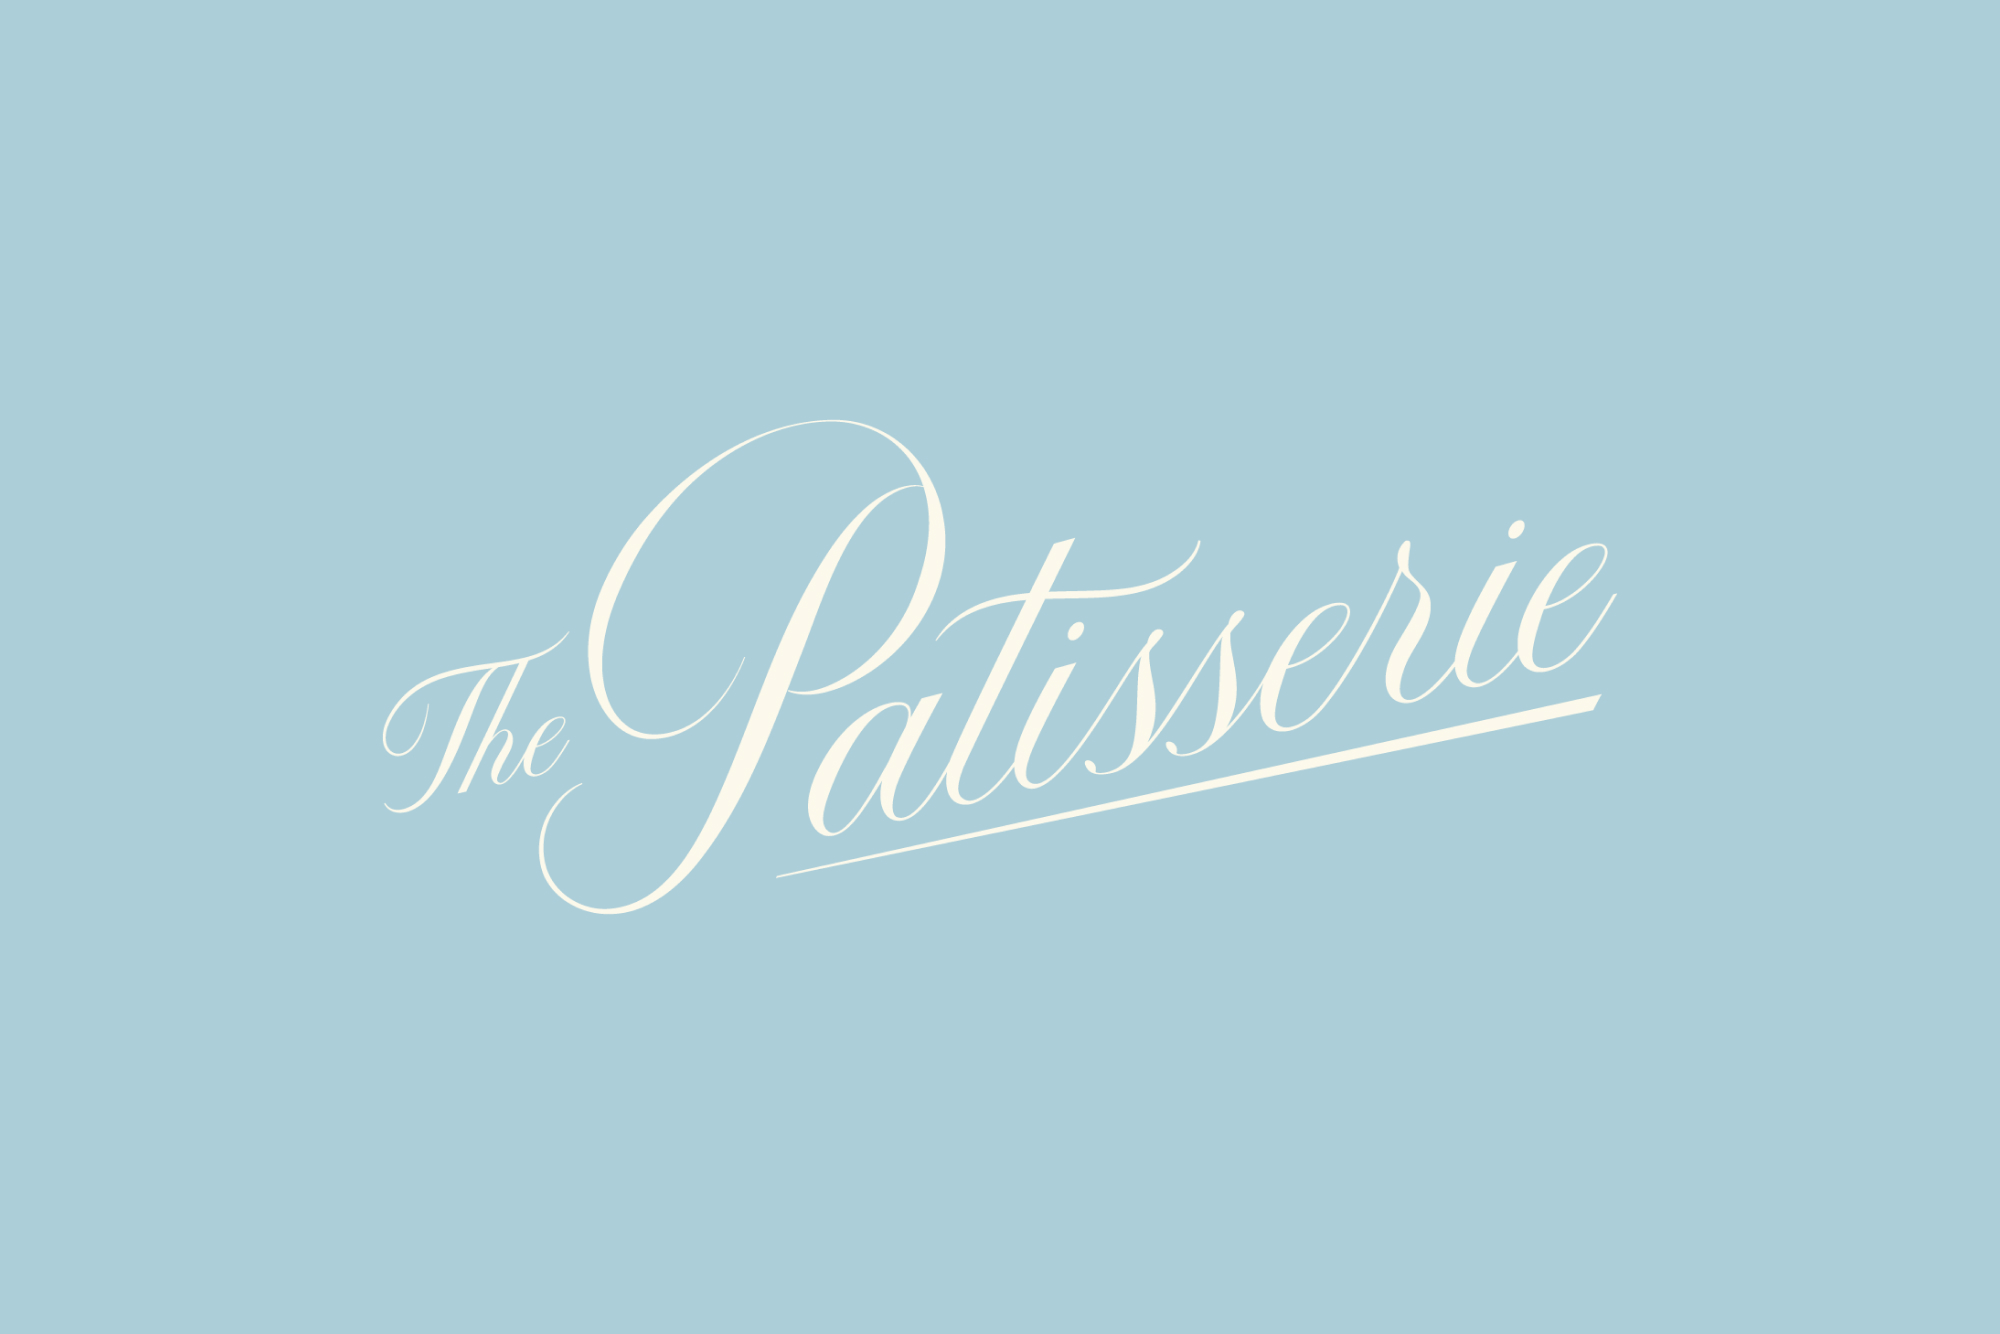 Visit Nemacolin The Patisserie gathering page